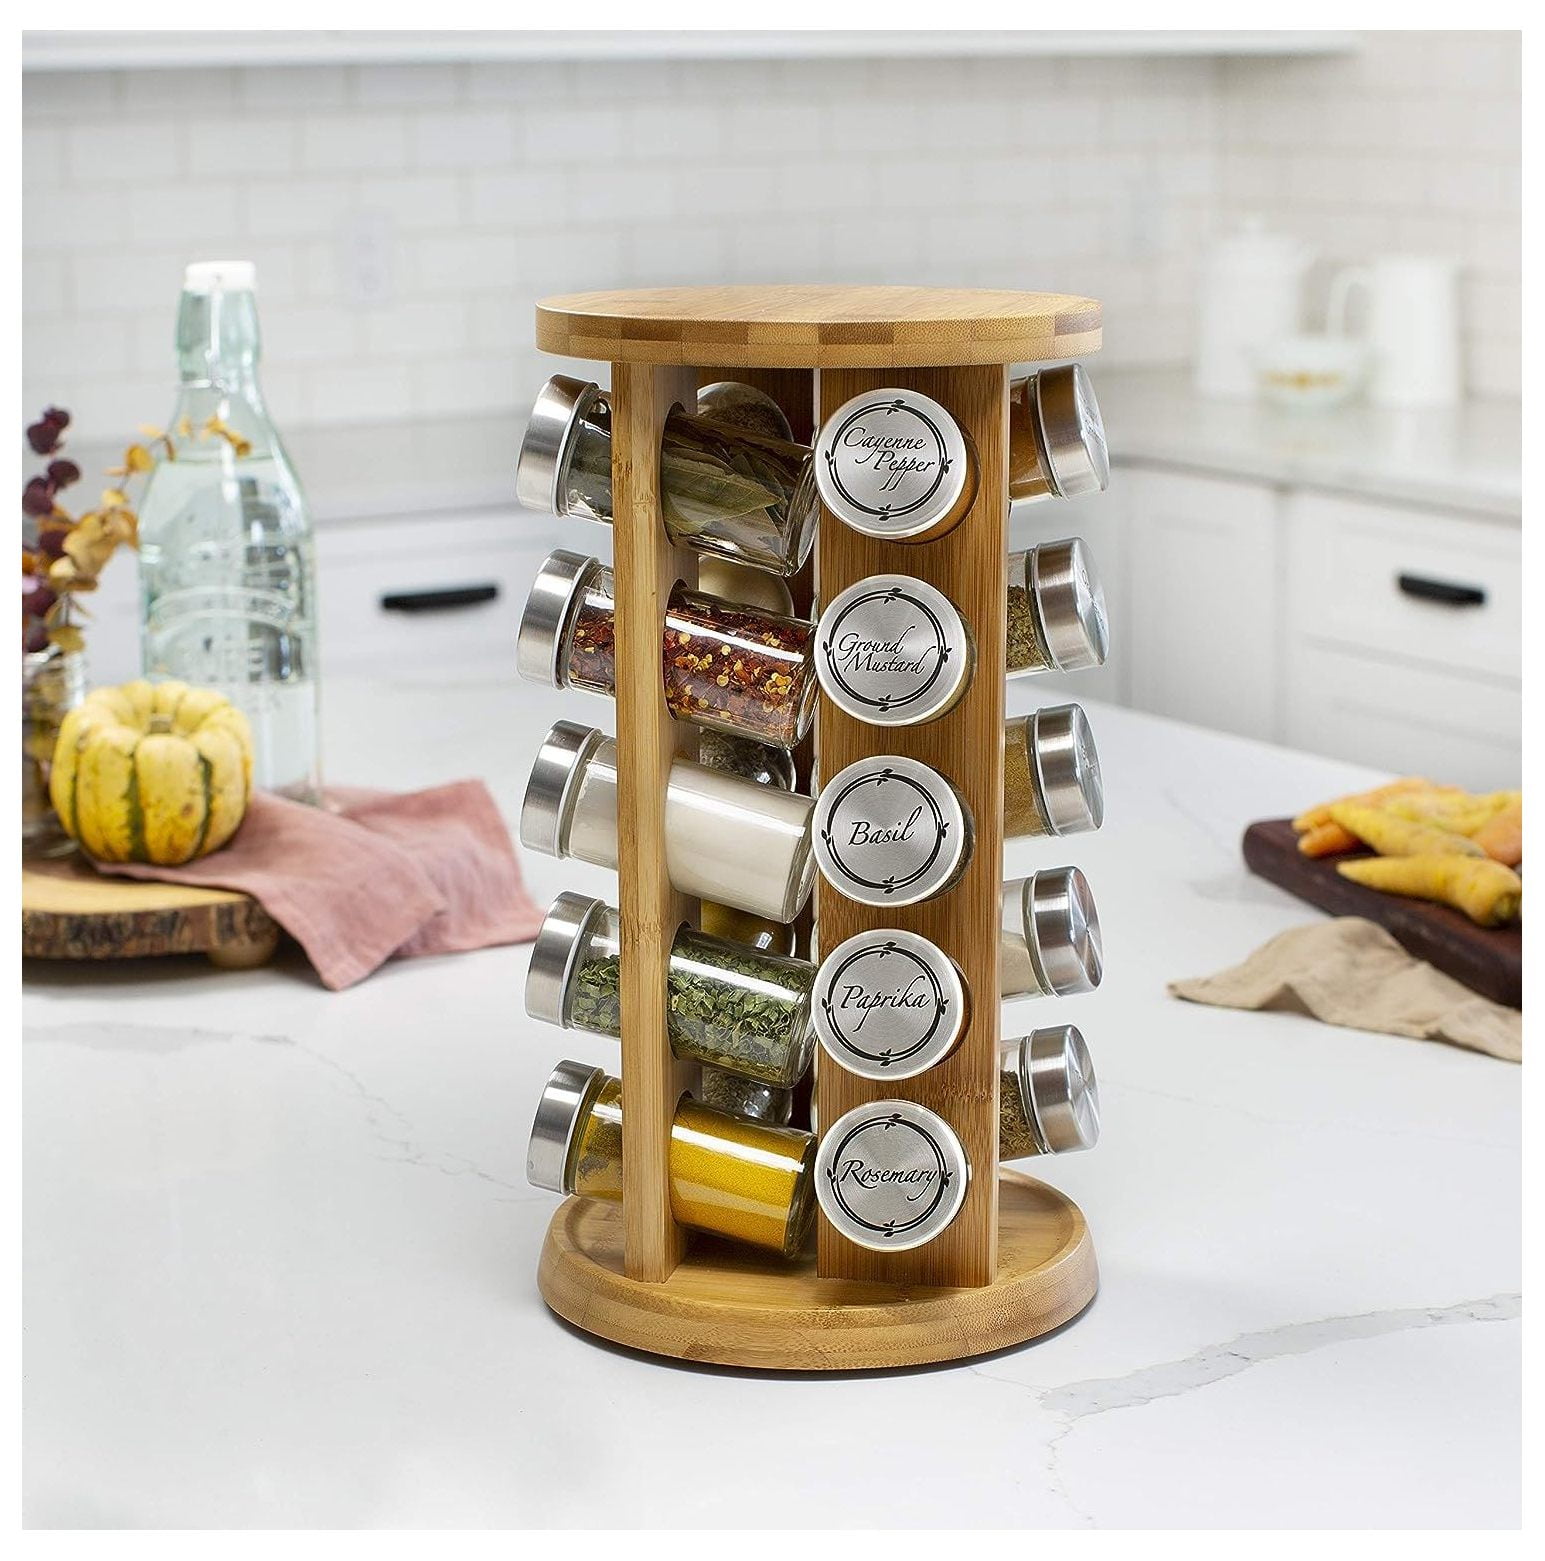  Pinnacle Cookery Bamboo Spice Rack For Countertop – Eco  Friendly Space Saving Wooden Seasoning Organizer 3-Tier Shelf : Home &  Kitchen